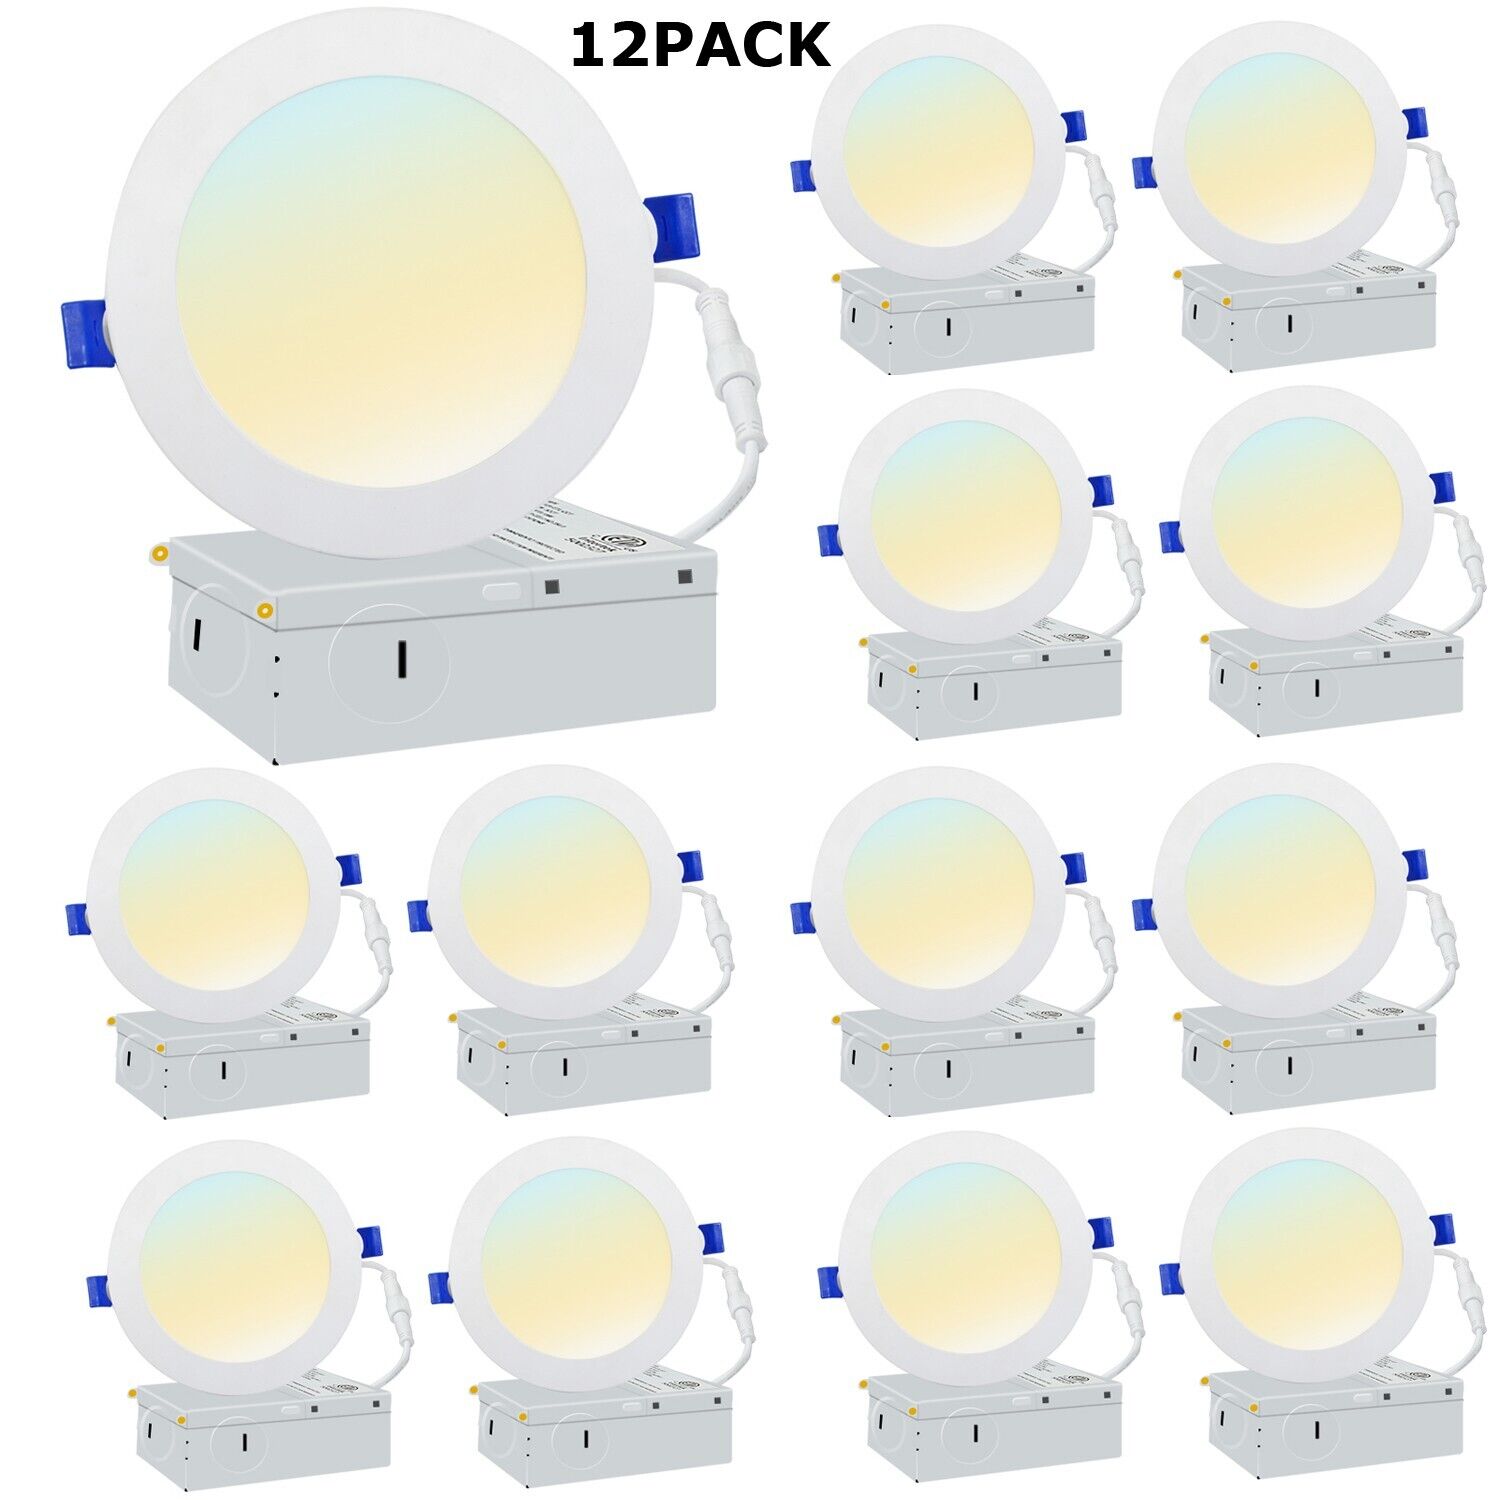 12 Pack 12W 6 Inch Ultra Thin LED Recessed Ceiling Lights Slim with Junction Box